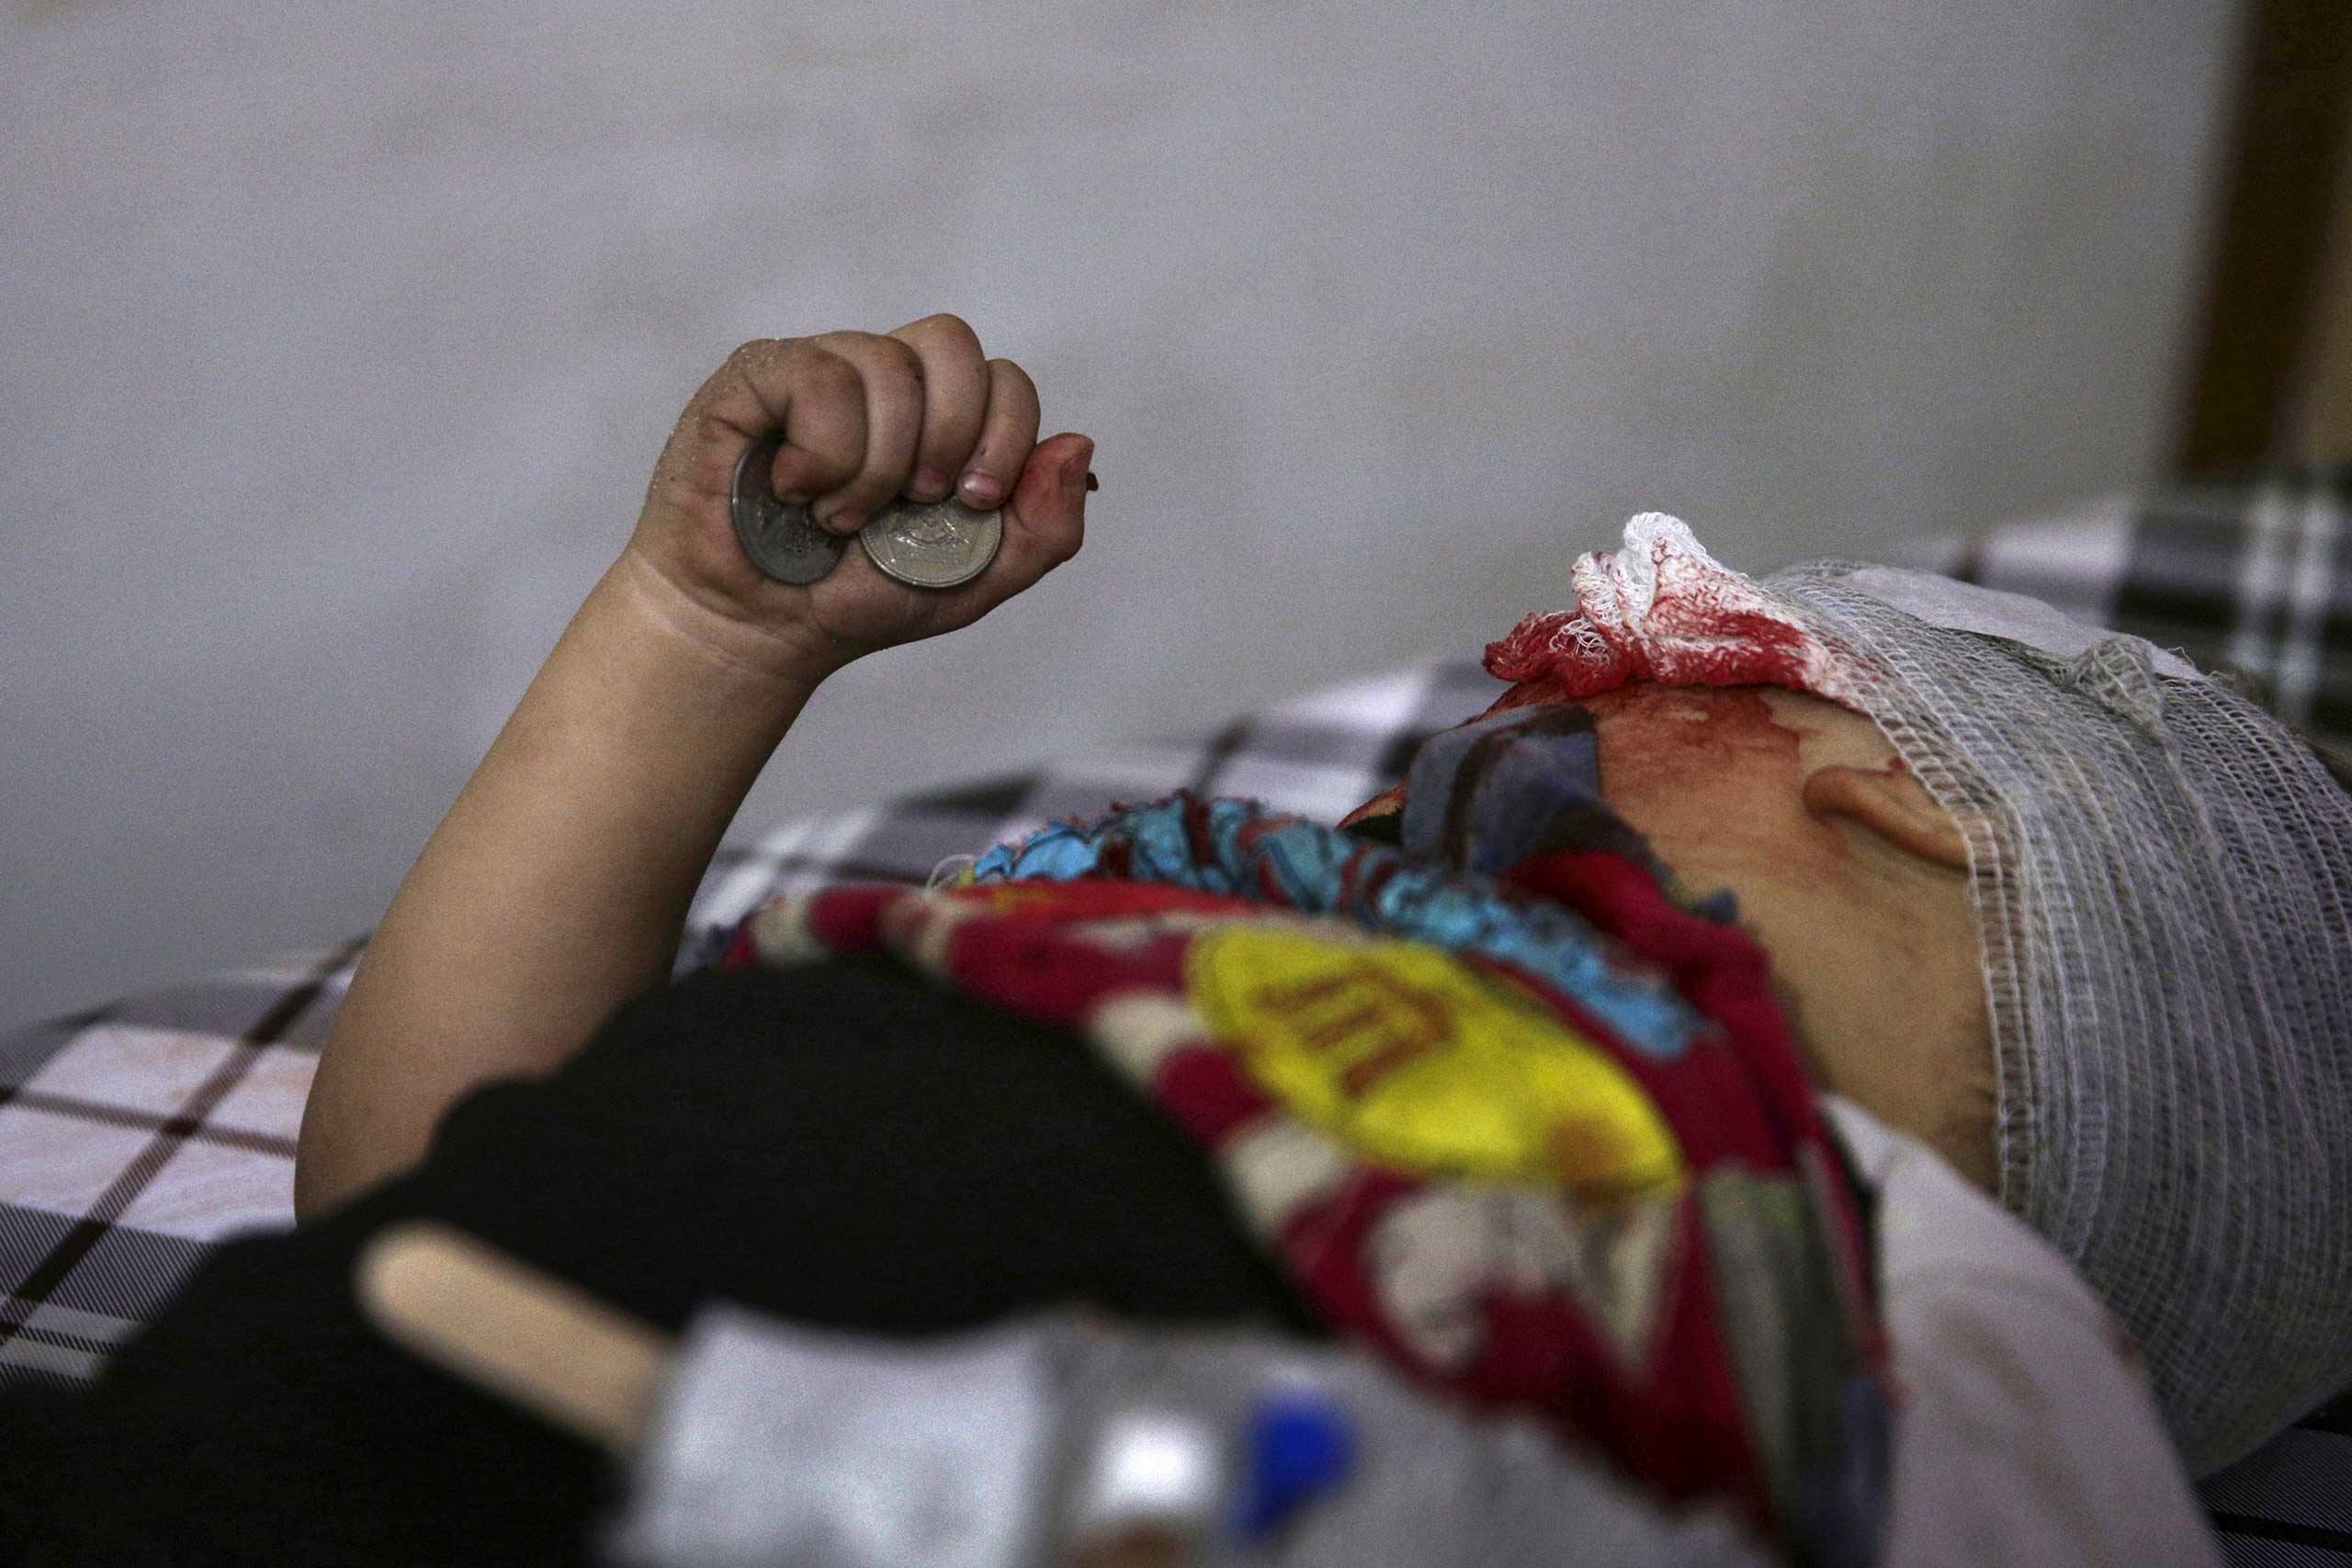 An injured child holds coins in his hand as he lies on a bed inside a field hospital, after what activists said was shelling by forces loyal to Syria's President Bashar al-Assad, in the Douma neighborhood of Damascus, Syria, Nov. 29, 2015.